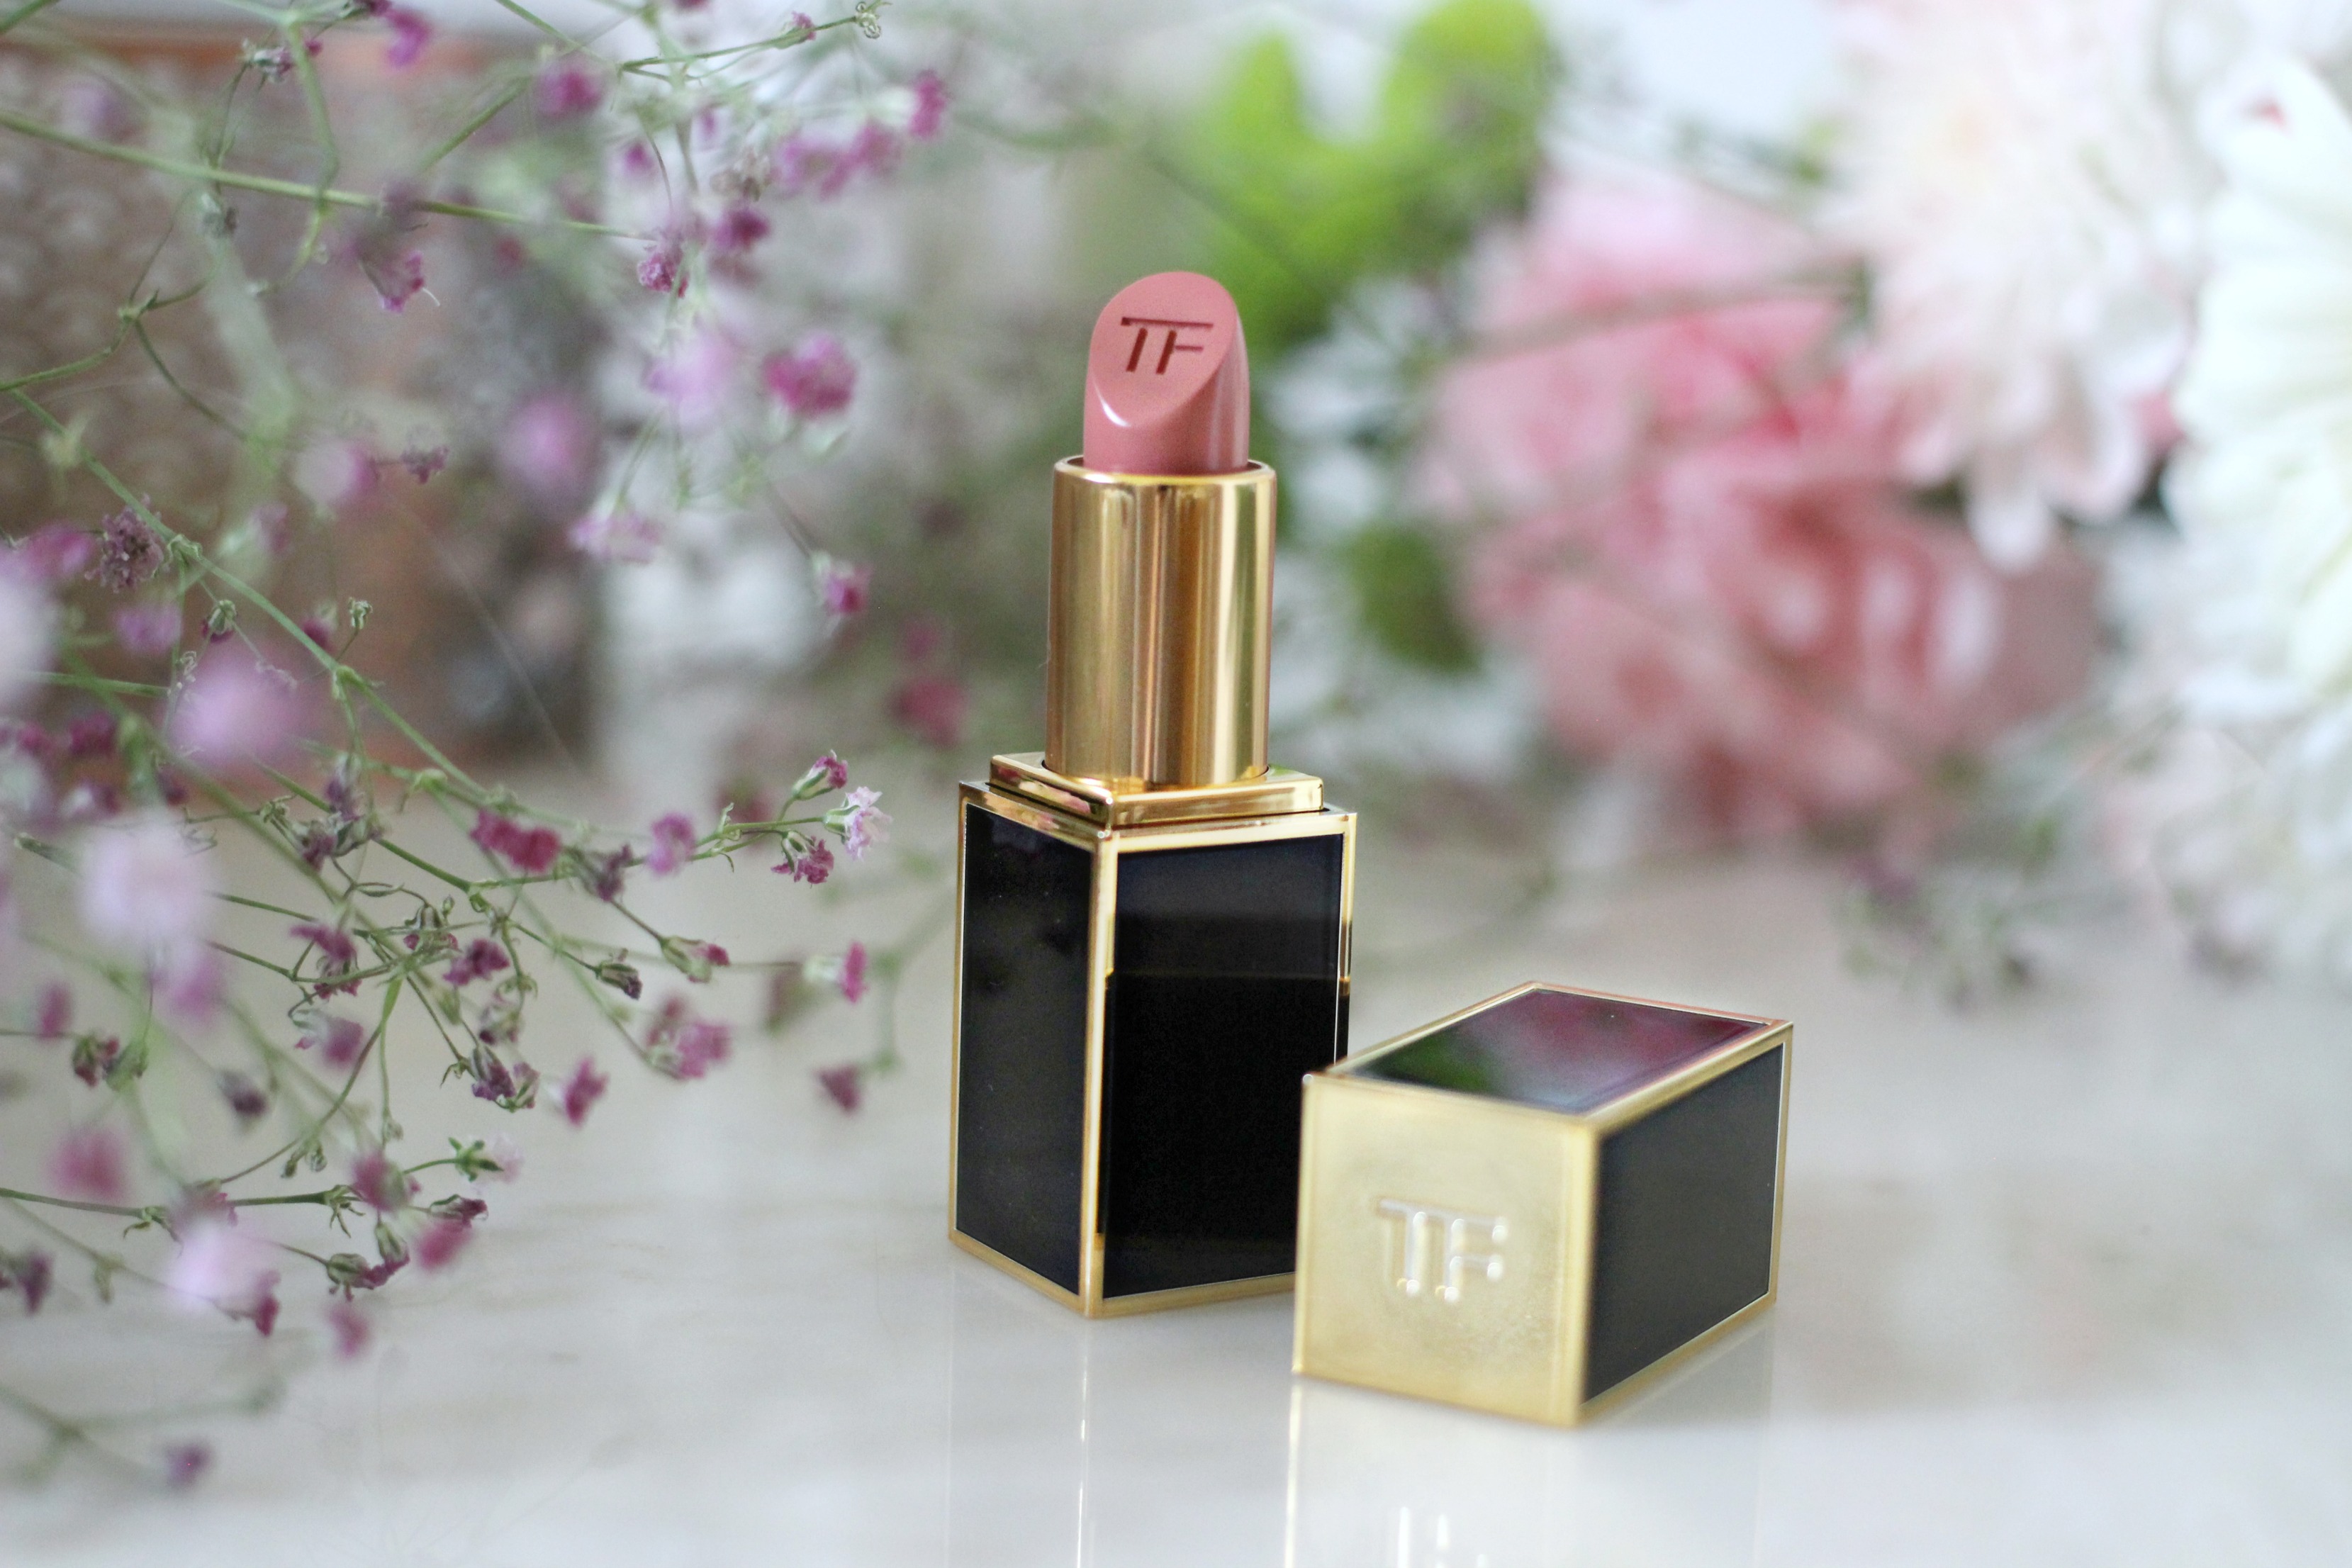 Tom Ford Spring Summer 2016 Beauty Makeup Collection -  Spanish Pink Lipstick